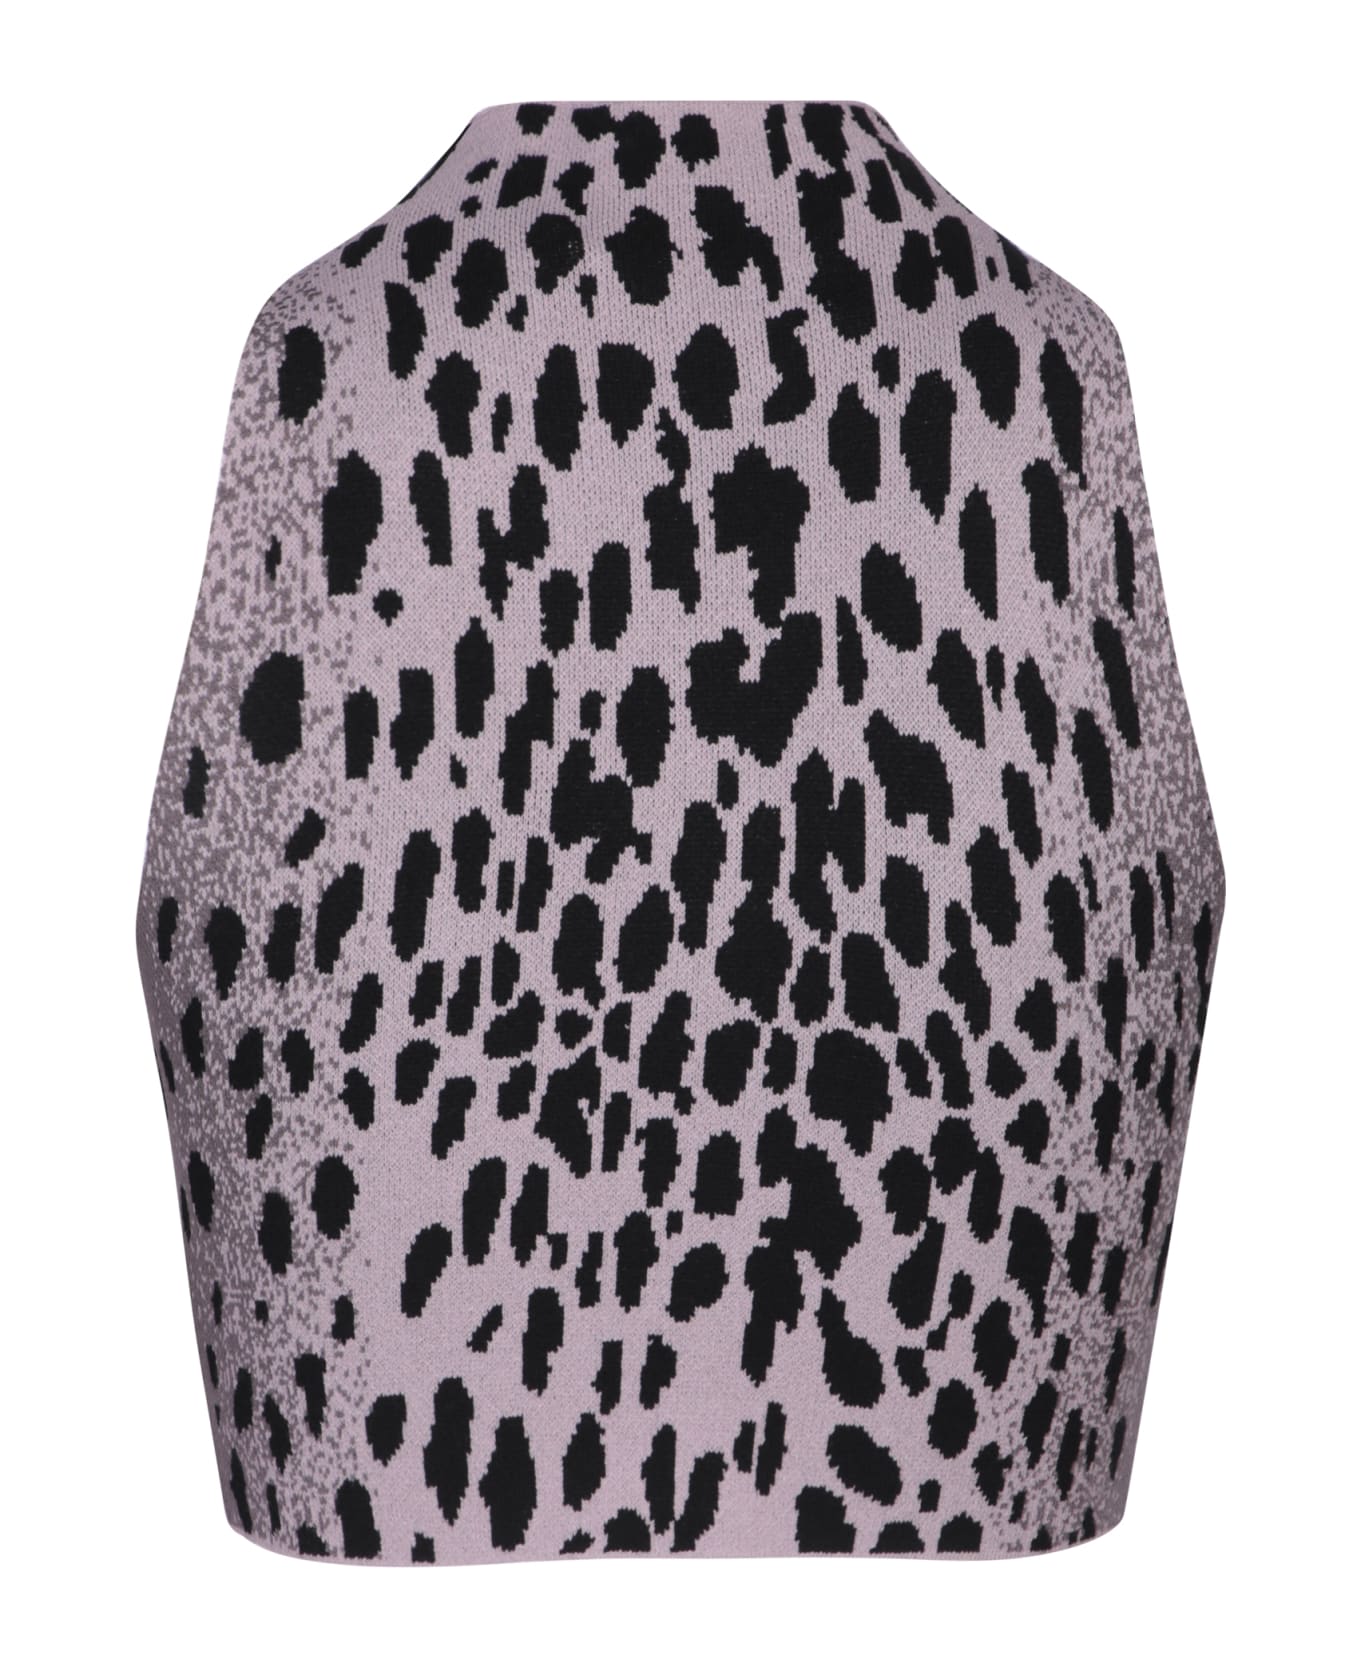 SSHEENA Leopard Knit Crop Top In Lilac And Black By Ssheena - Multi